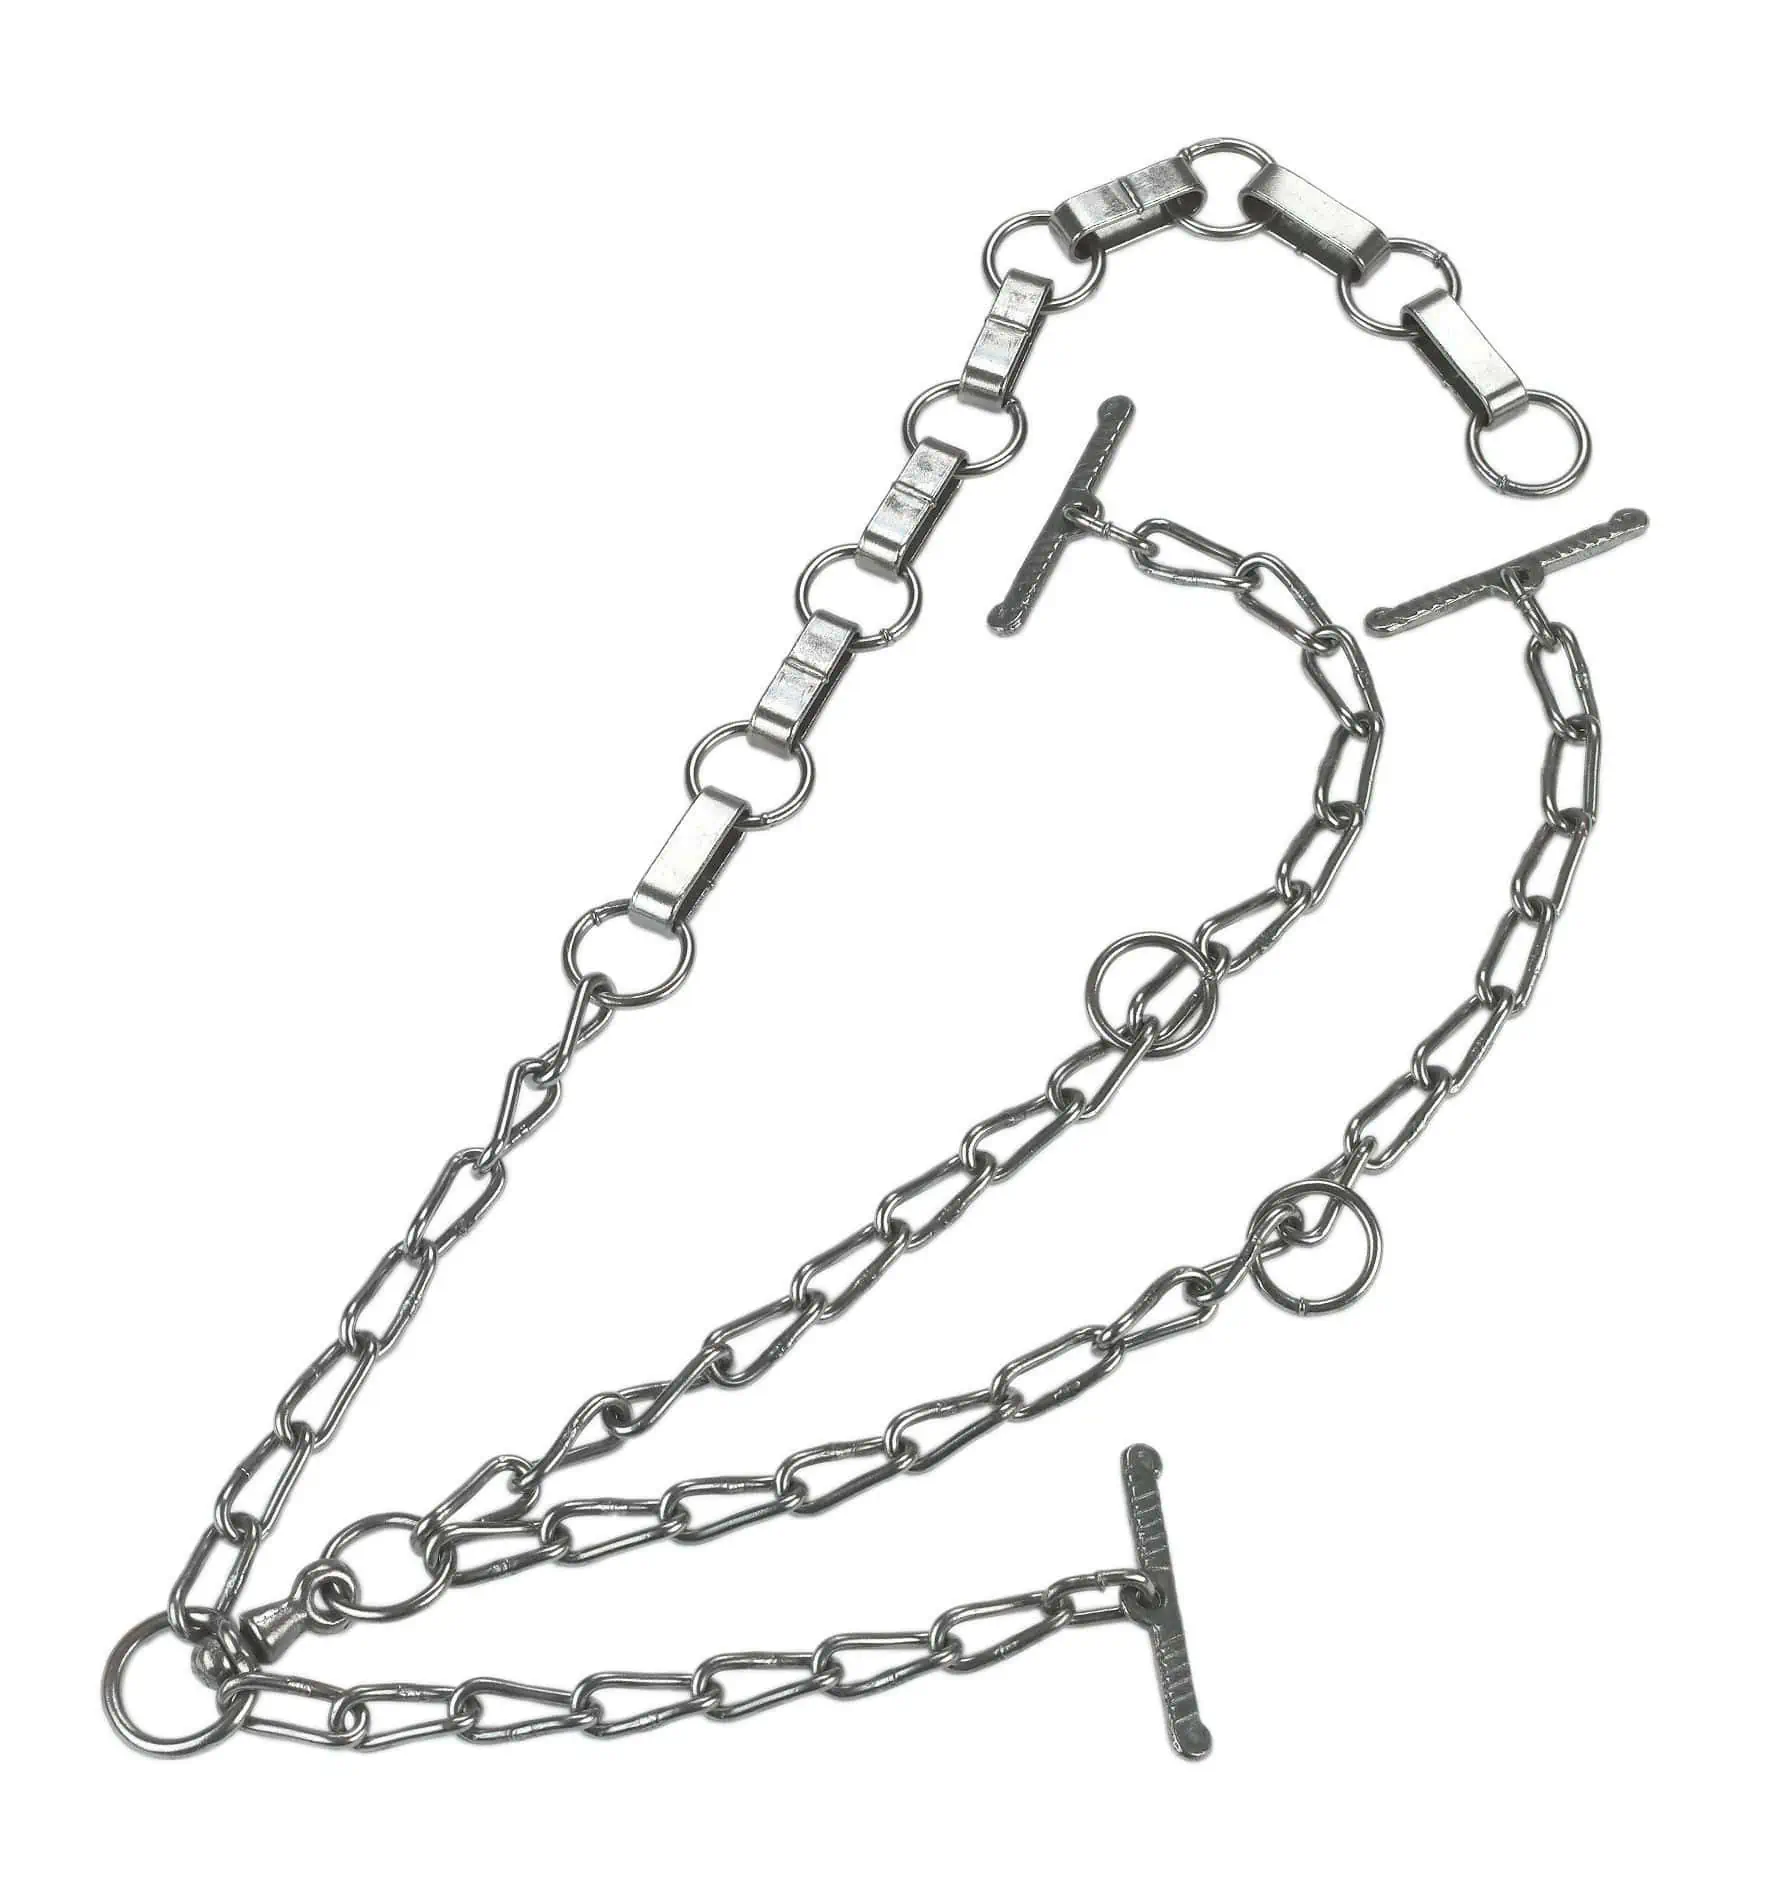 Cow chain with flat links double lengthened galvanized